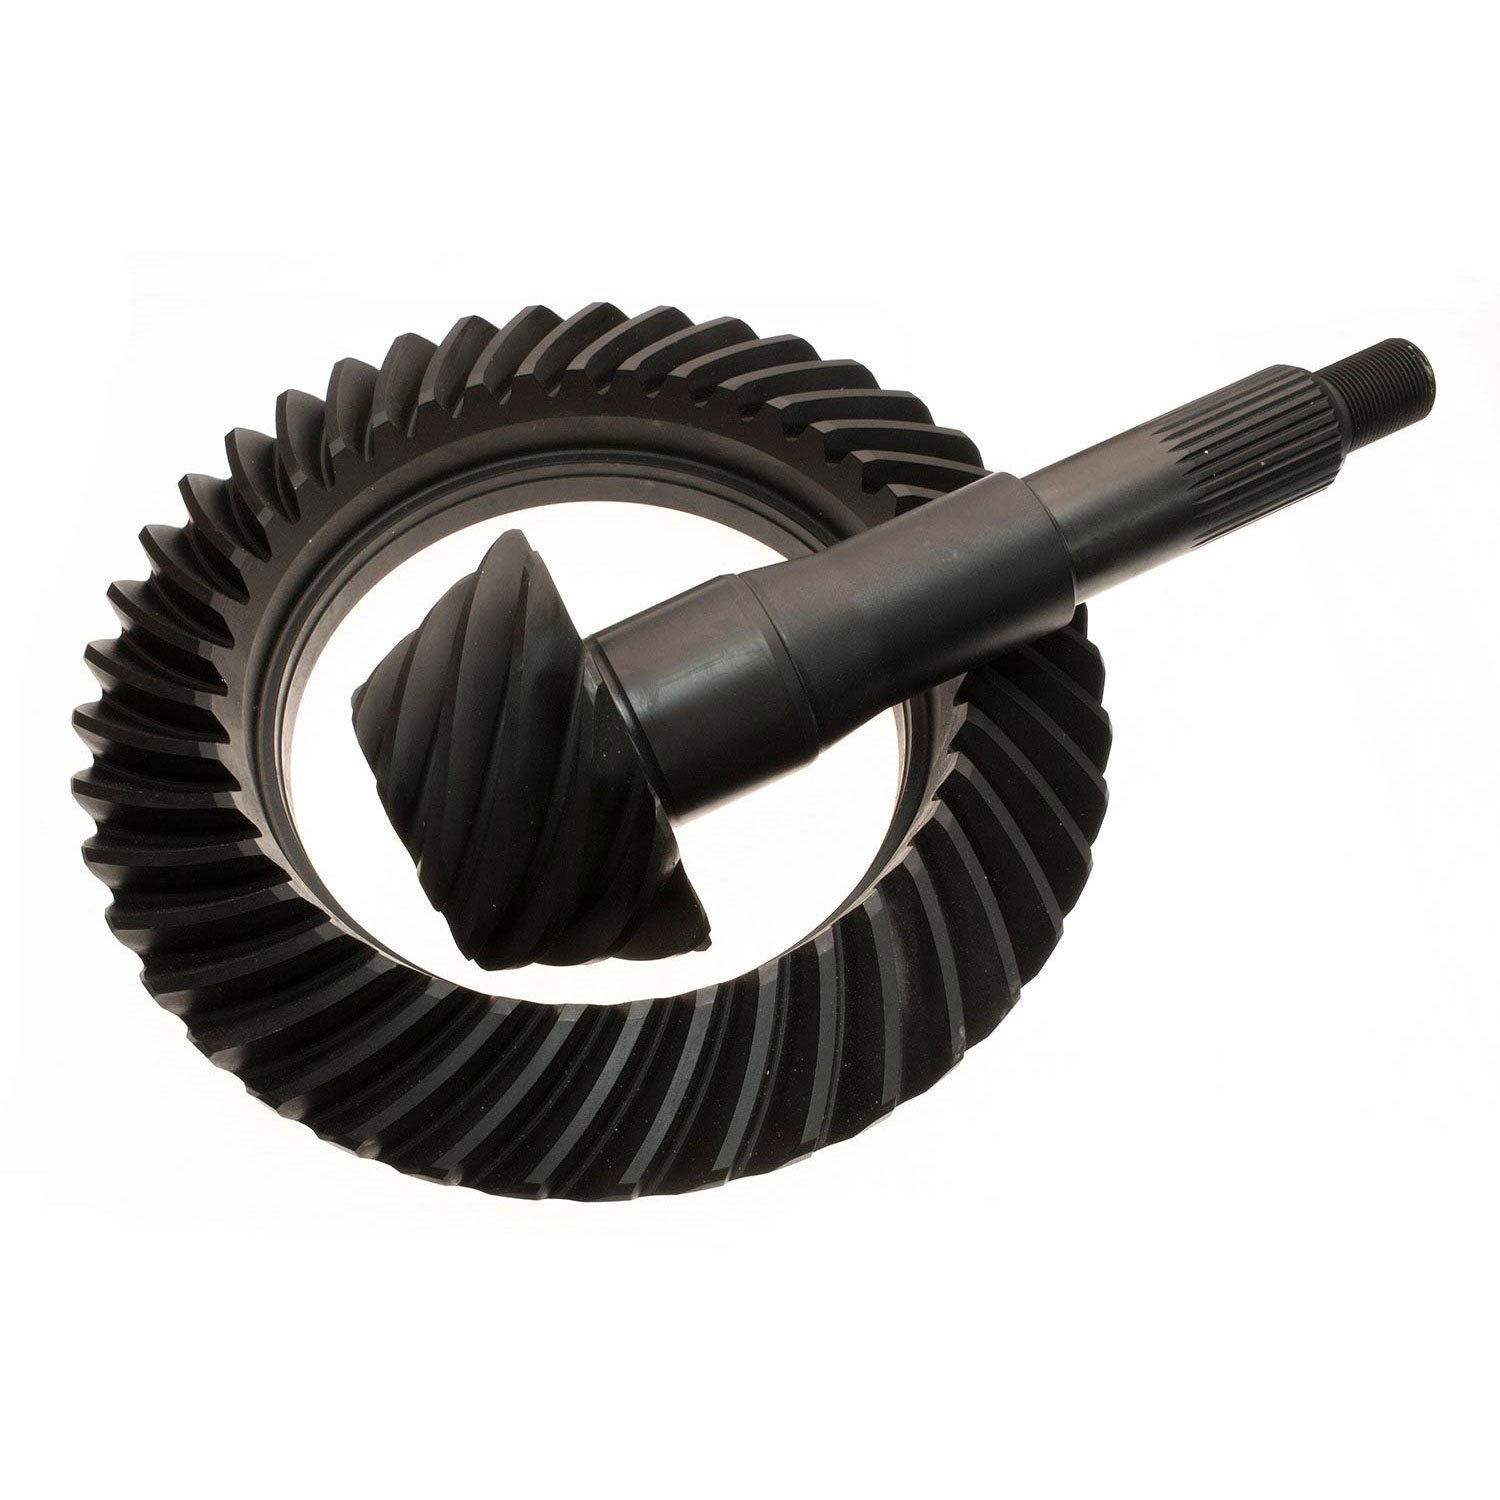 Ring & Pinion Gears Ford 10.25" 4.56 Ratio